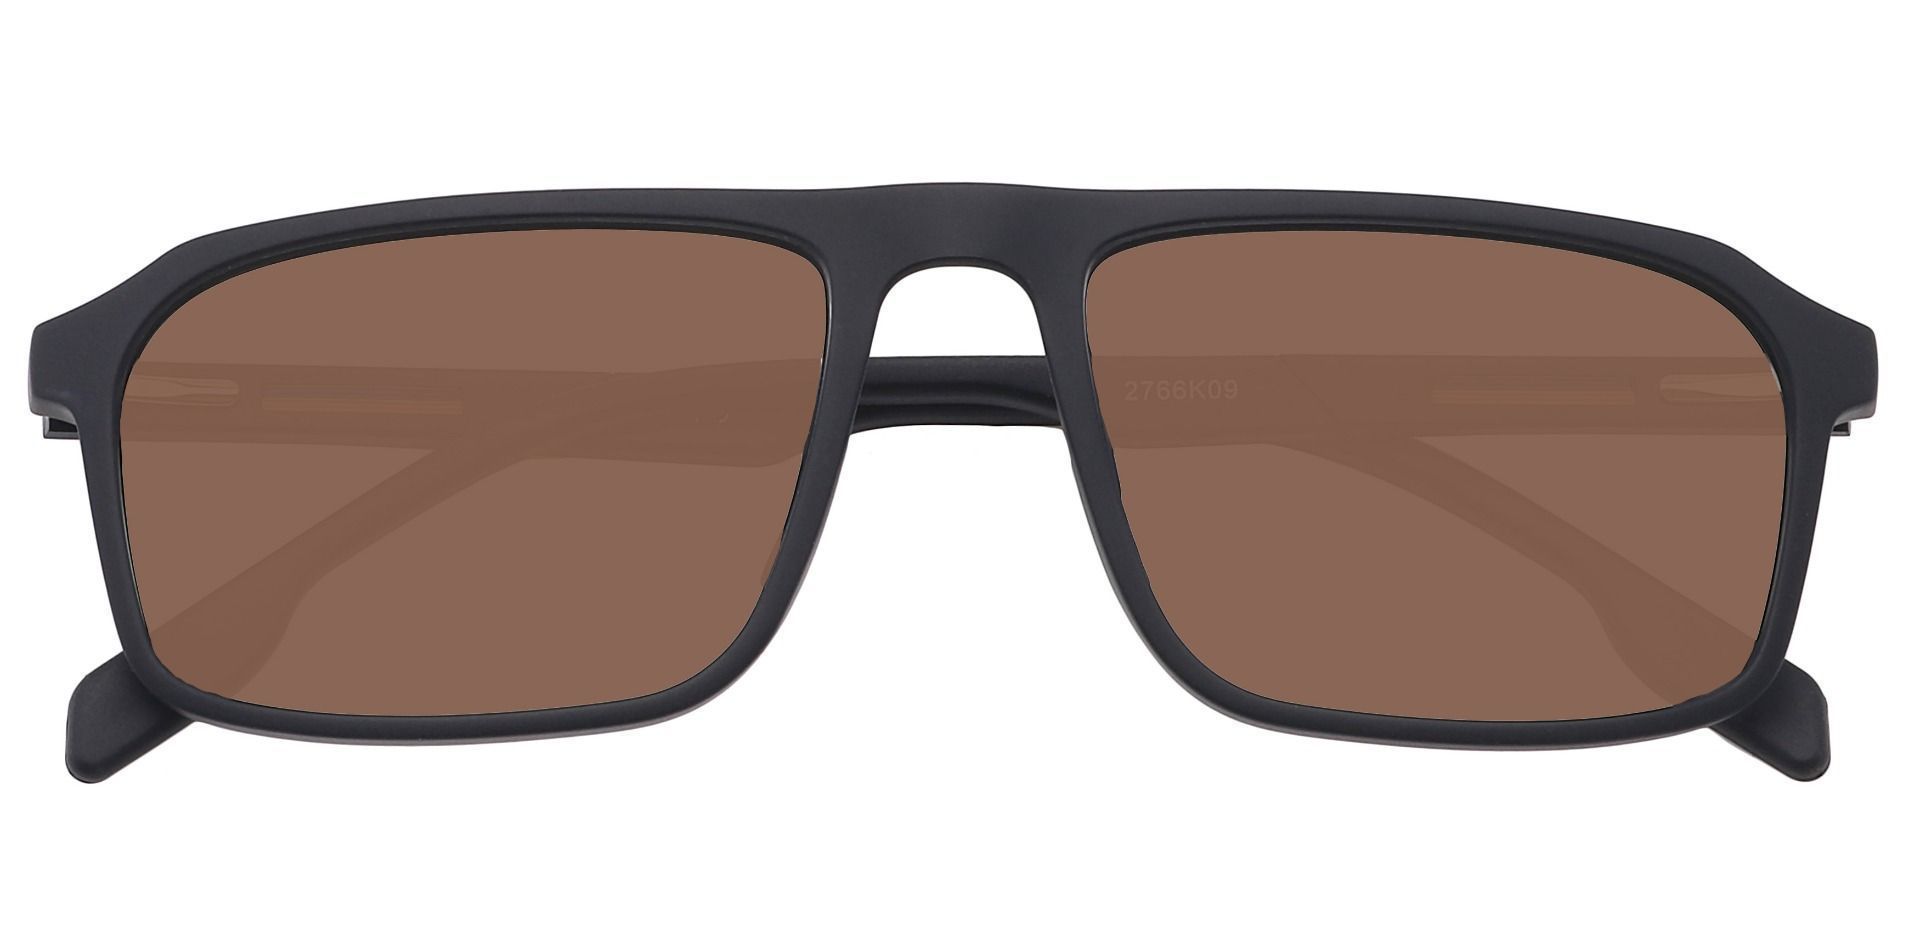 Hector Rectangle Non-Rx Sunglasses - Black Frame With Brown Lenses